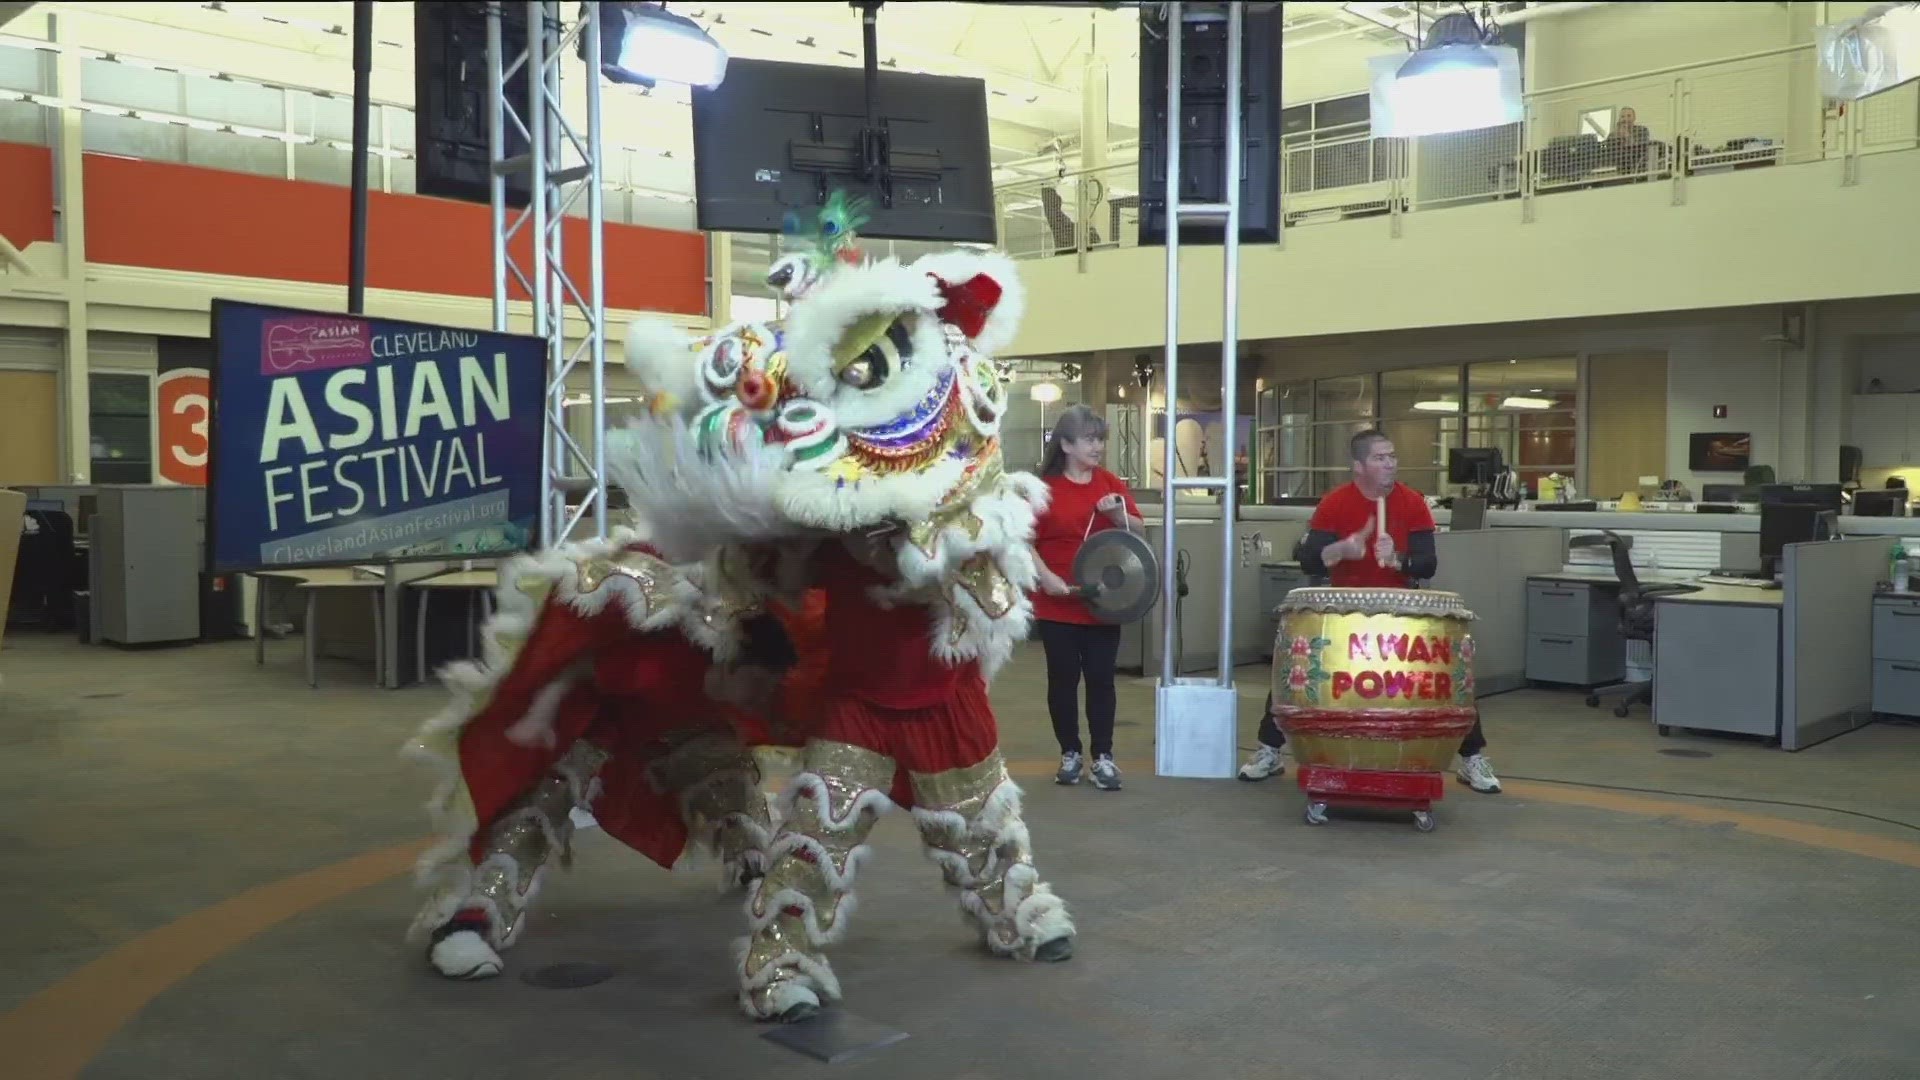 The Kwan Family Lion Dance Team has performed the traditional Chinese lion dance for over 40 years.